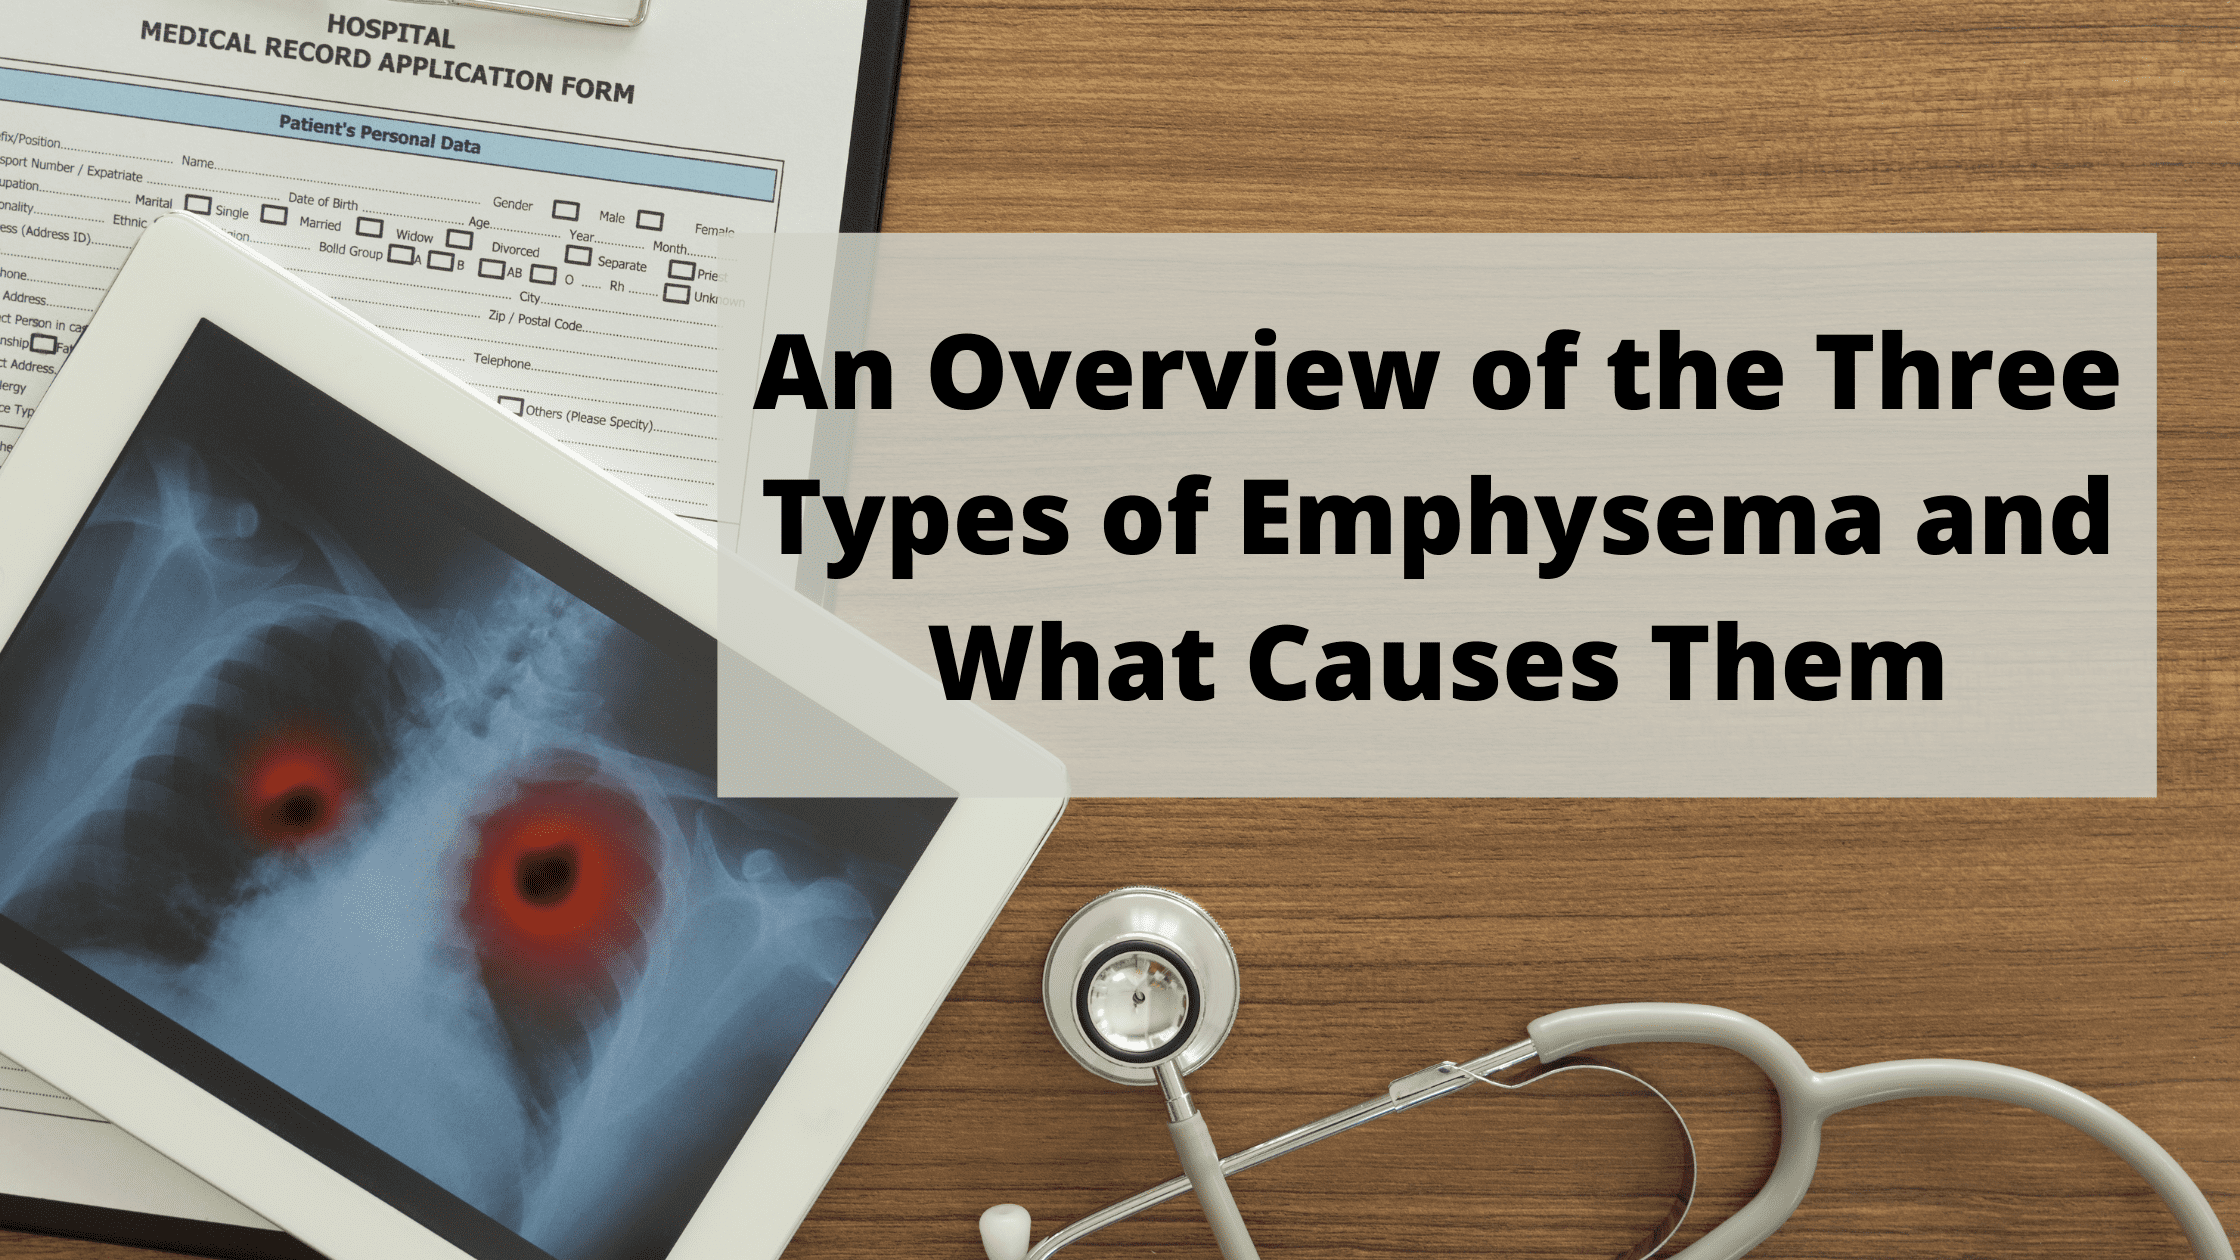 An Overview of the Three Types of Emphysema and What Causes Them (1)